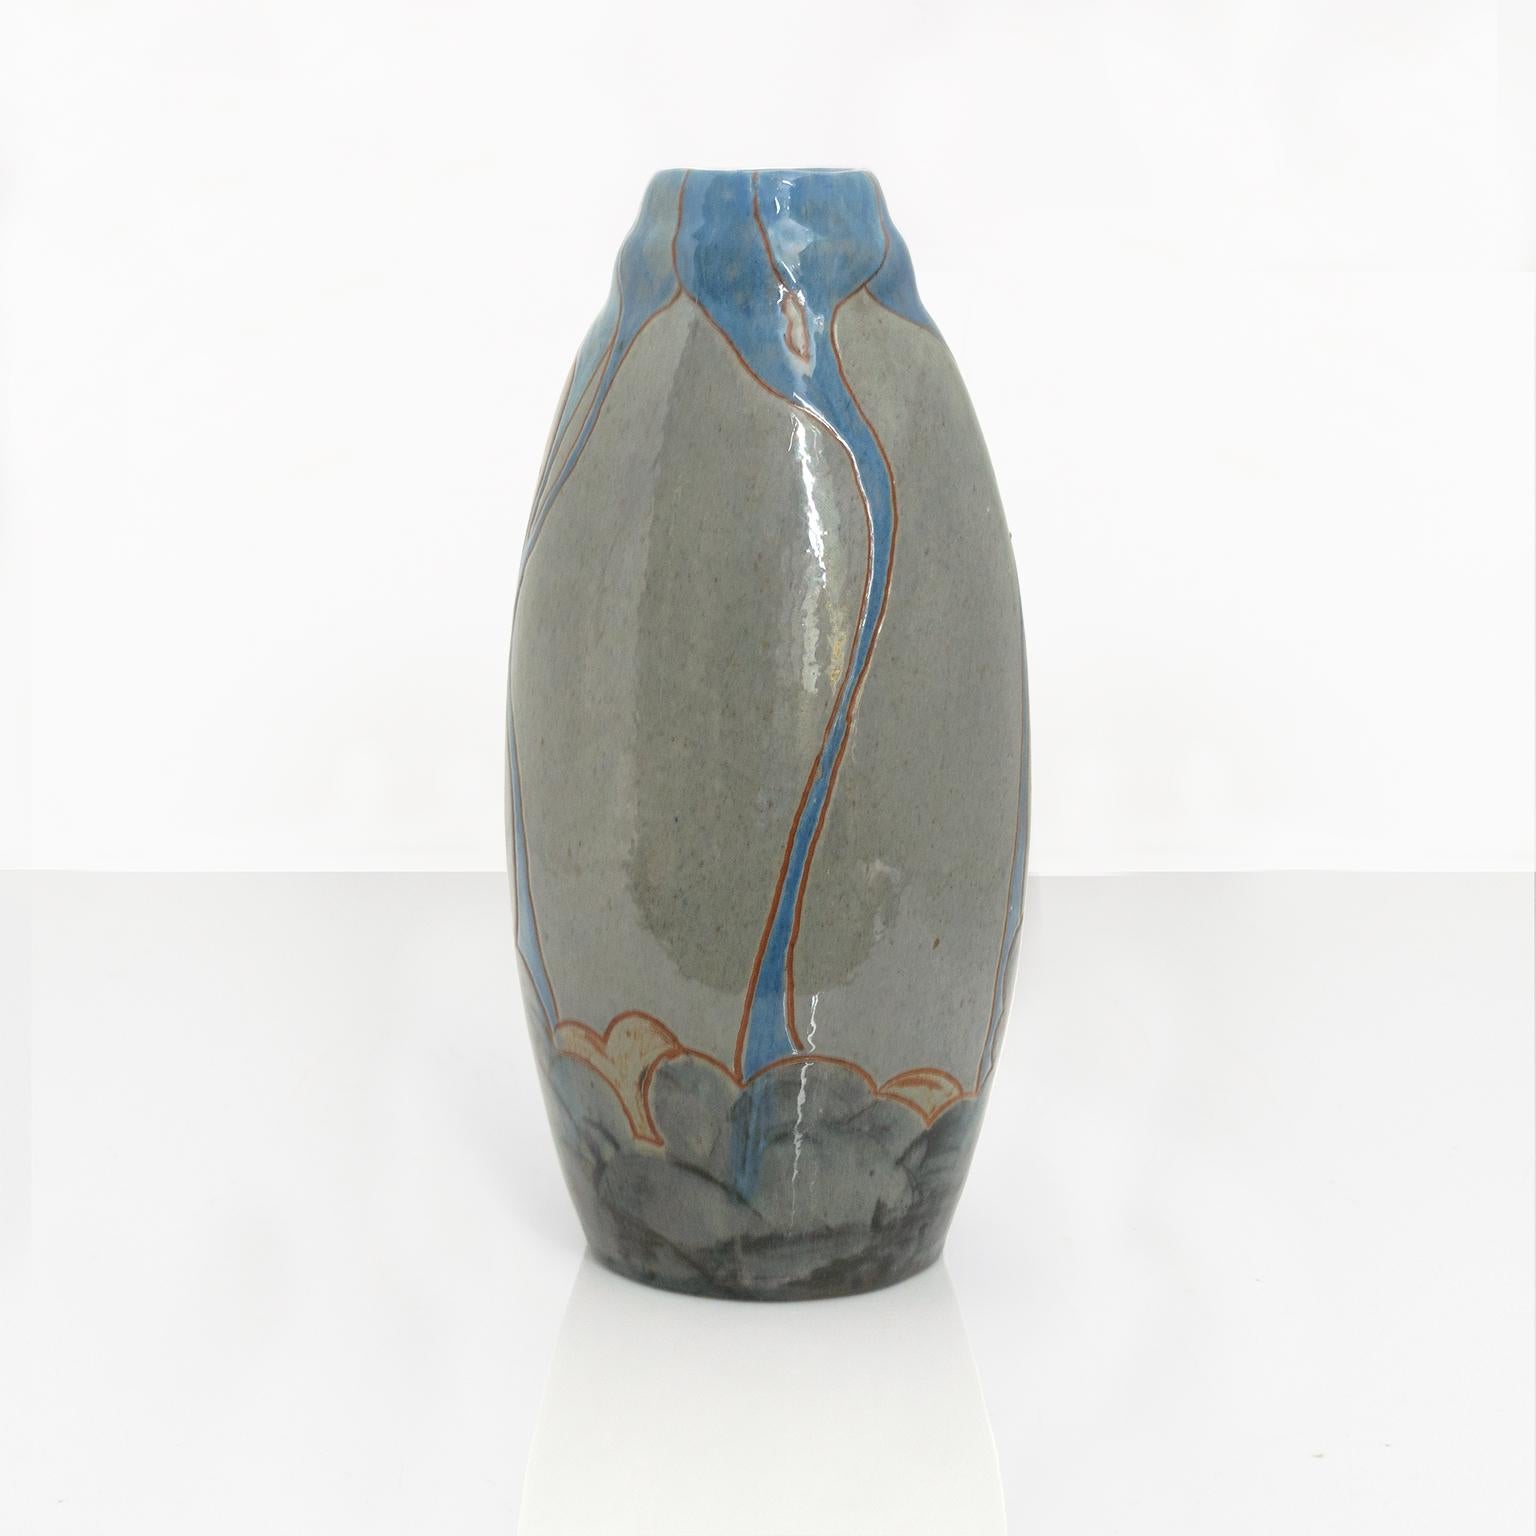 A Swedish Art Nouveau organically shaped ceramic vase with languid lines in blue glaze over a neutral gray body. Made by John Andersson for Hogans, circa 1910. Signed on bottom. 

Measures: height: 10.5“, diameter: 5“.